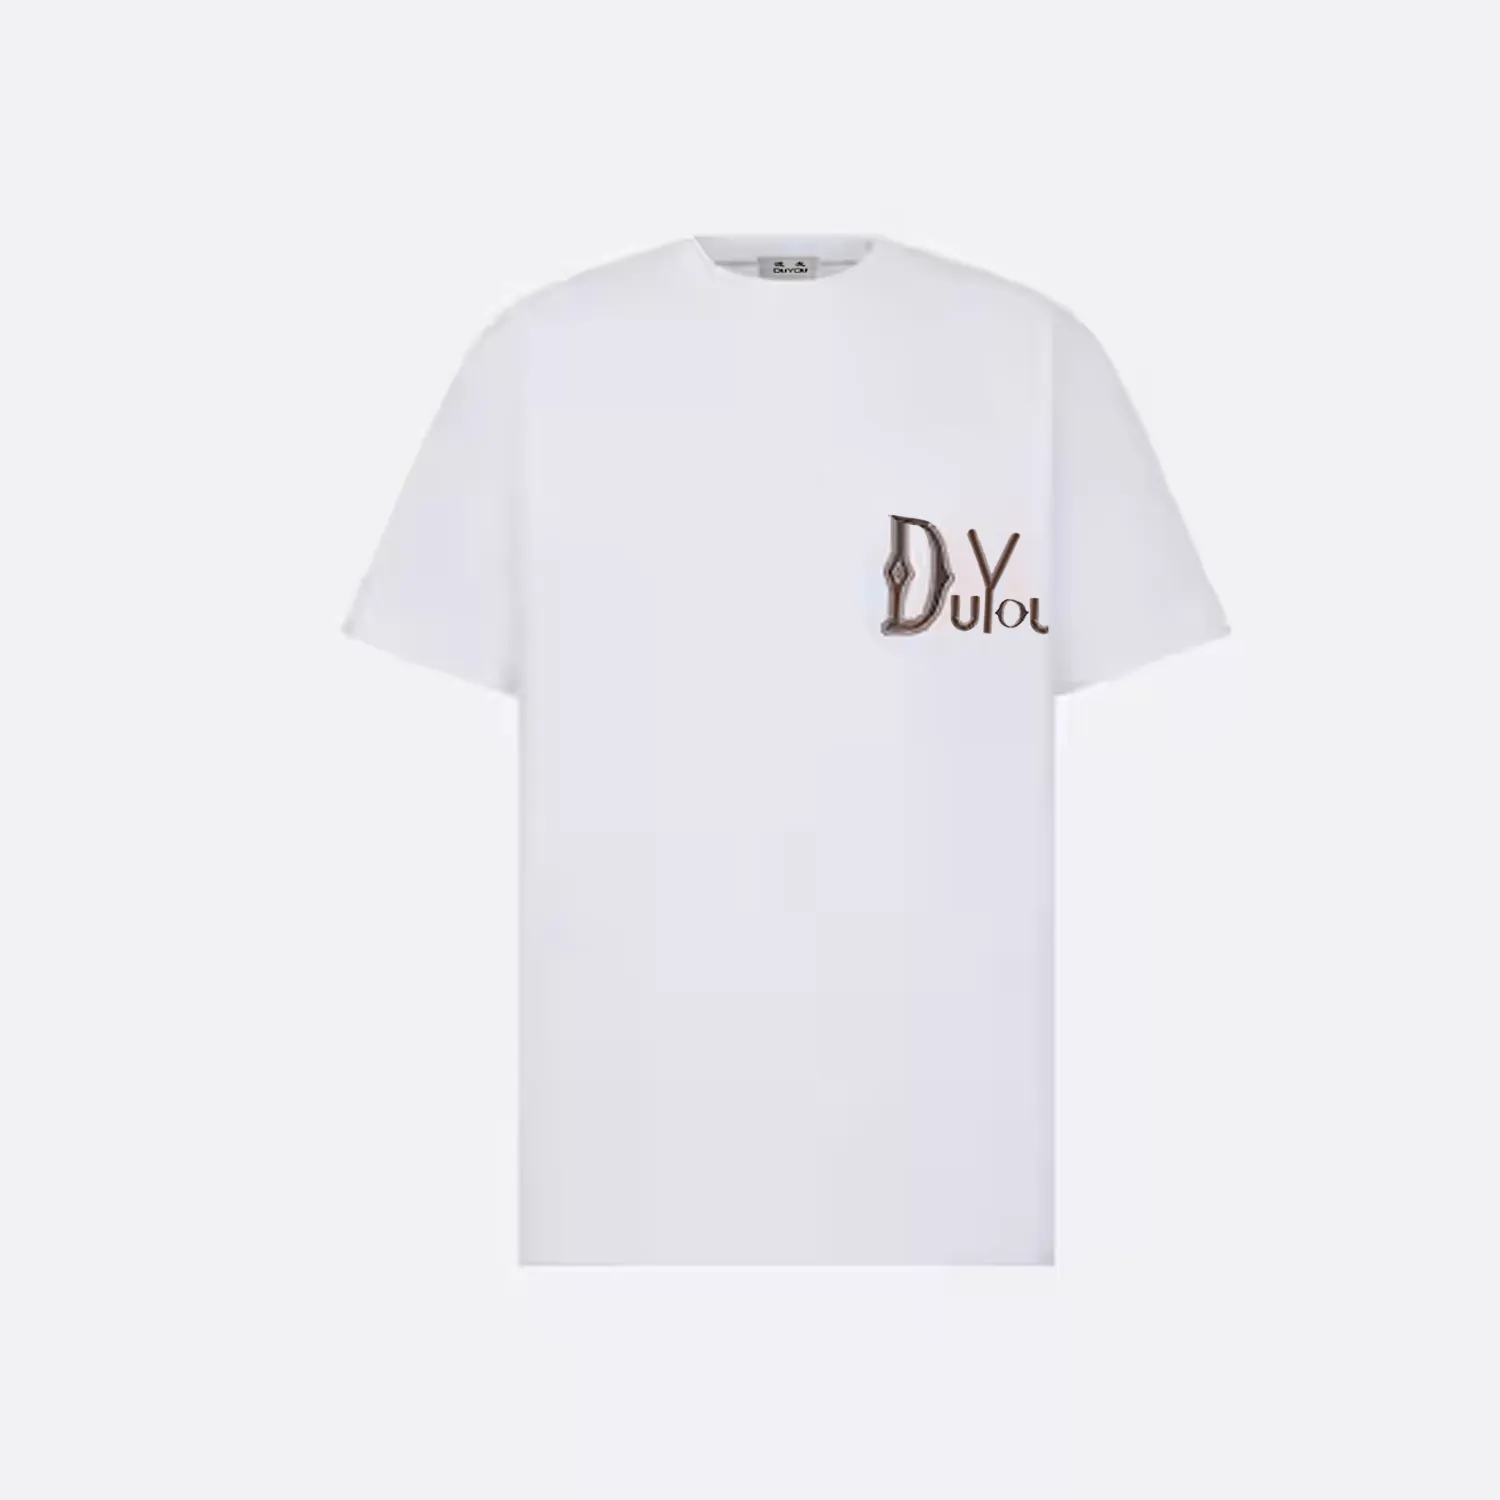 Duyou Men's Relaxed Fit T-shirt Brand Clothing Men Women Summer T Shirt With Embroder Logo Slub Cotton Jersey High Quality Tops 7189